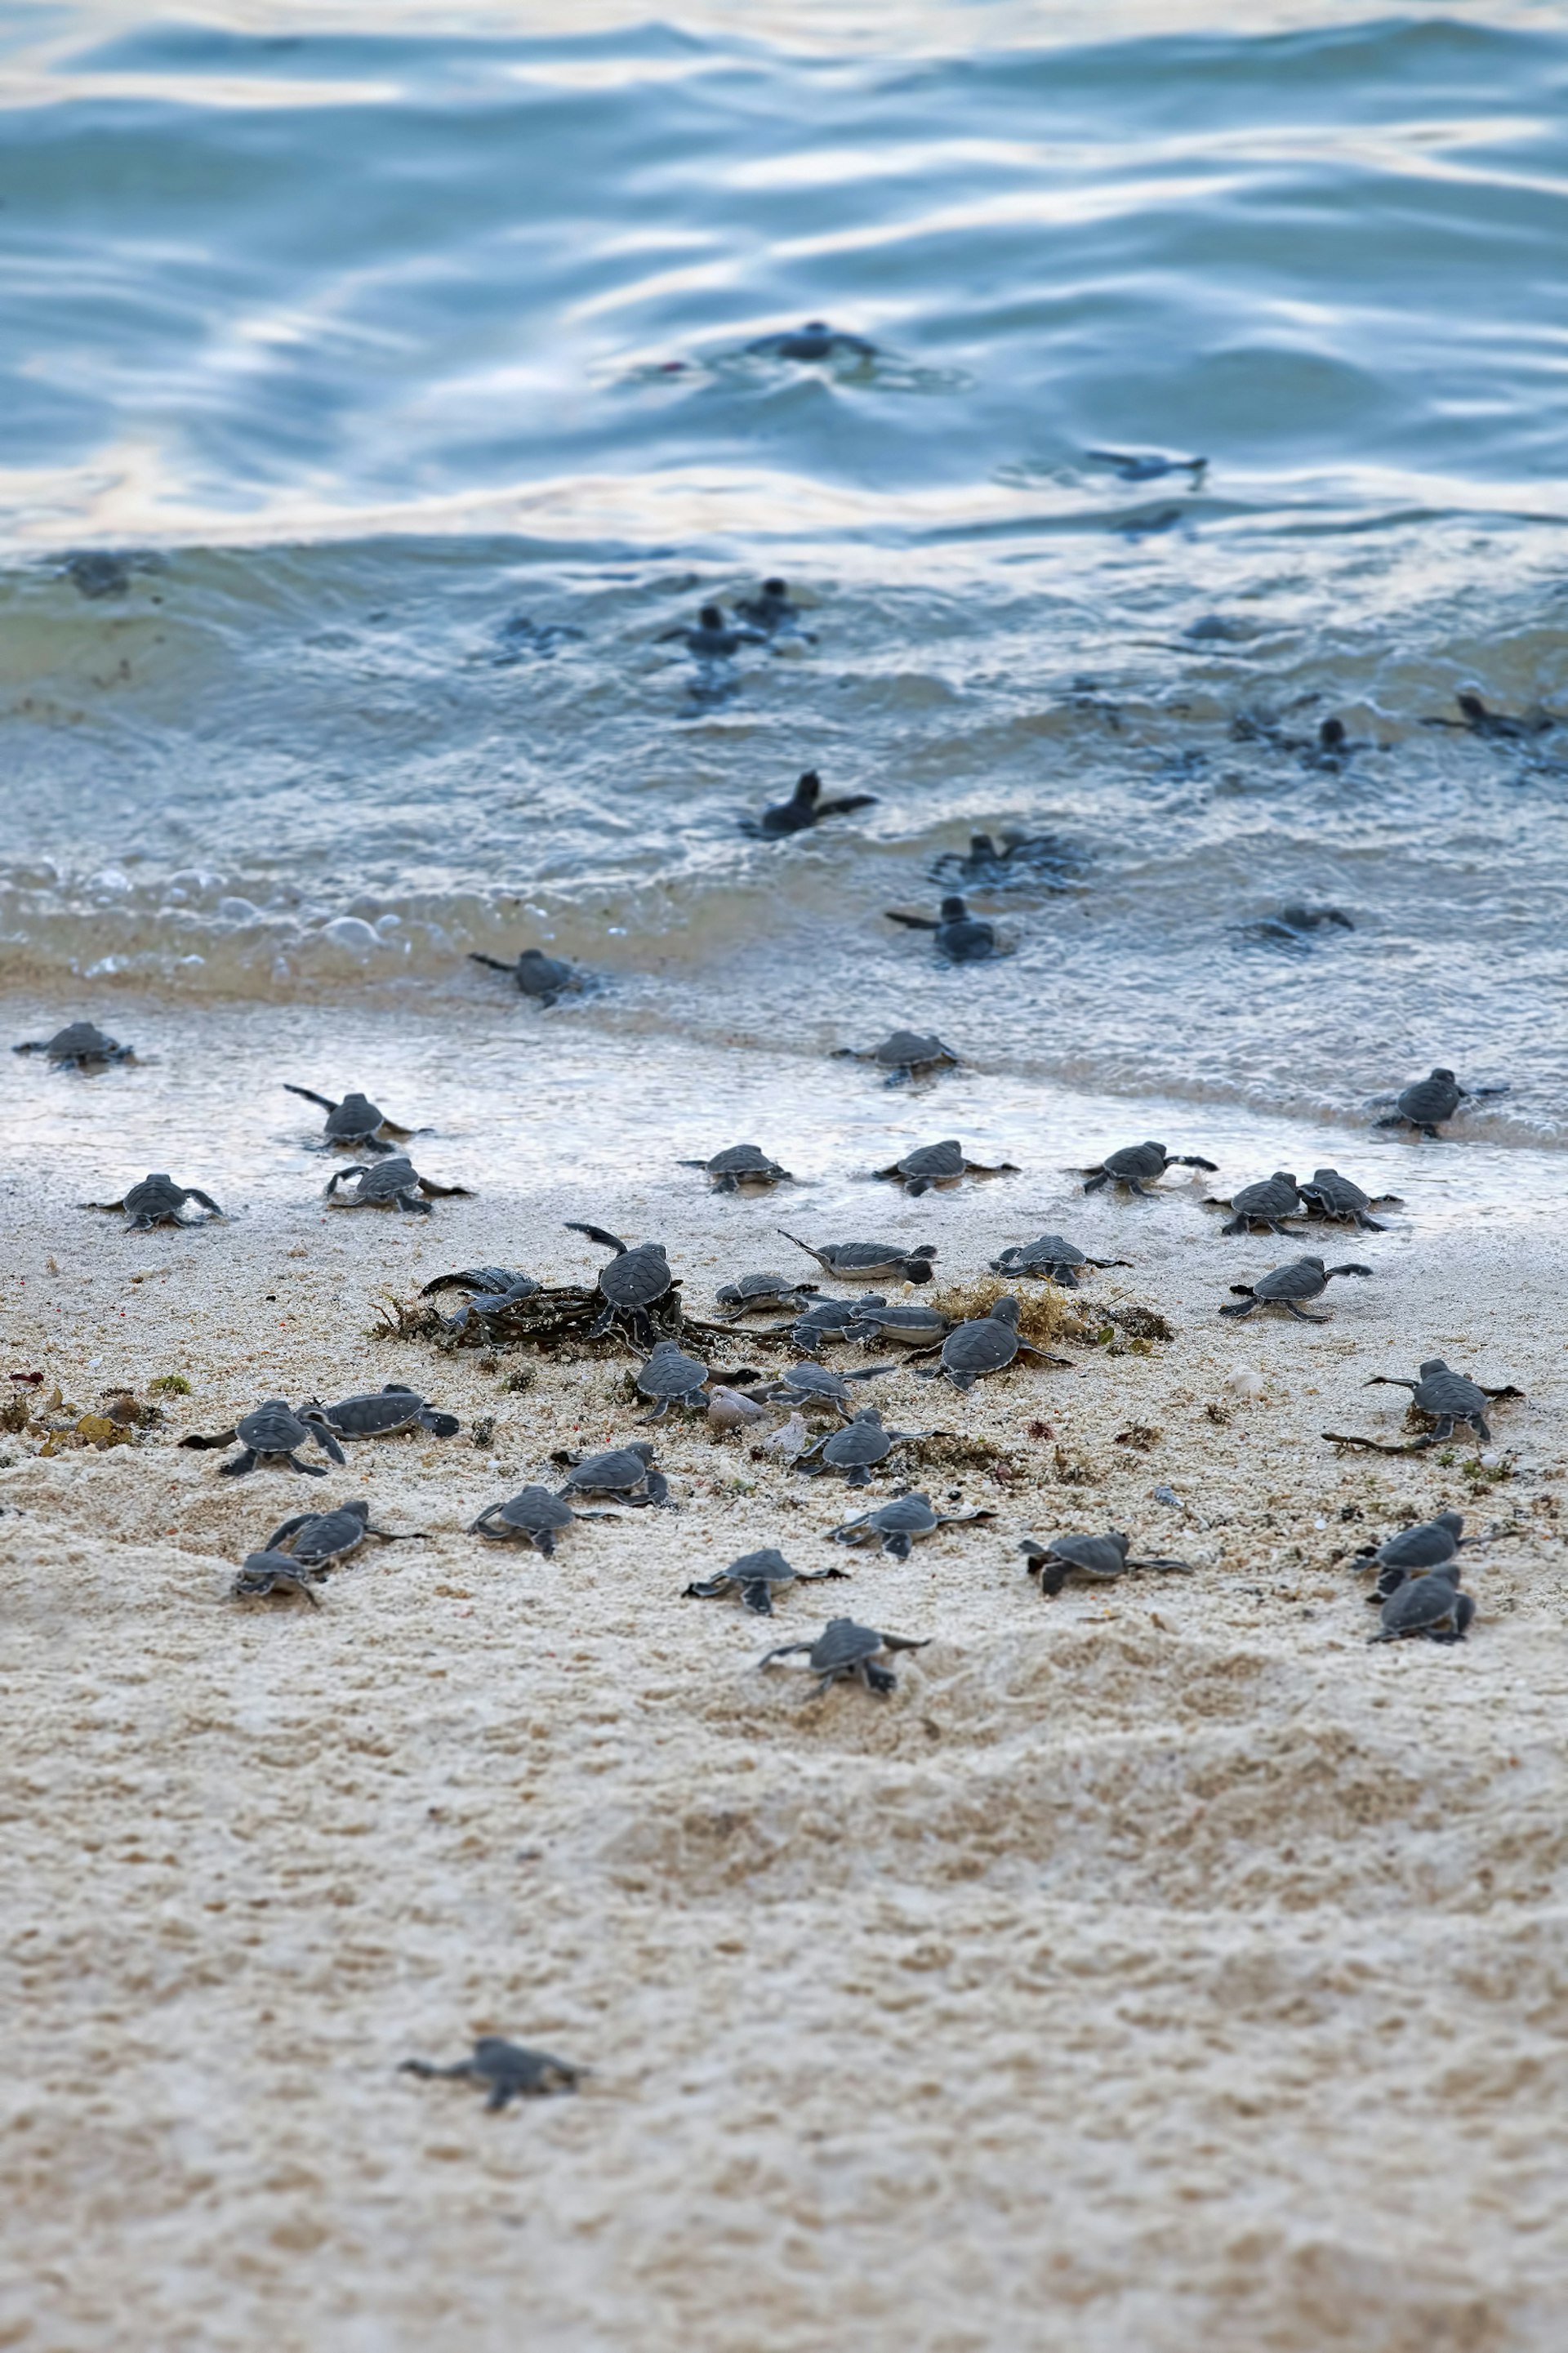 Features - Turtle Hatchlings taking their first steps down the beach and into the ocean